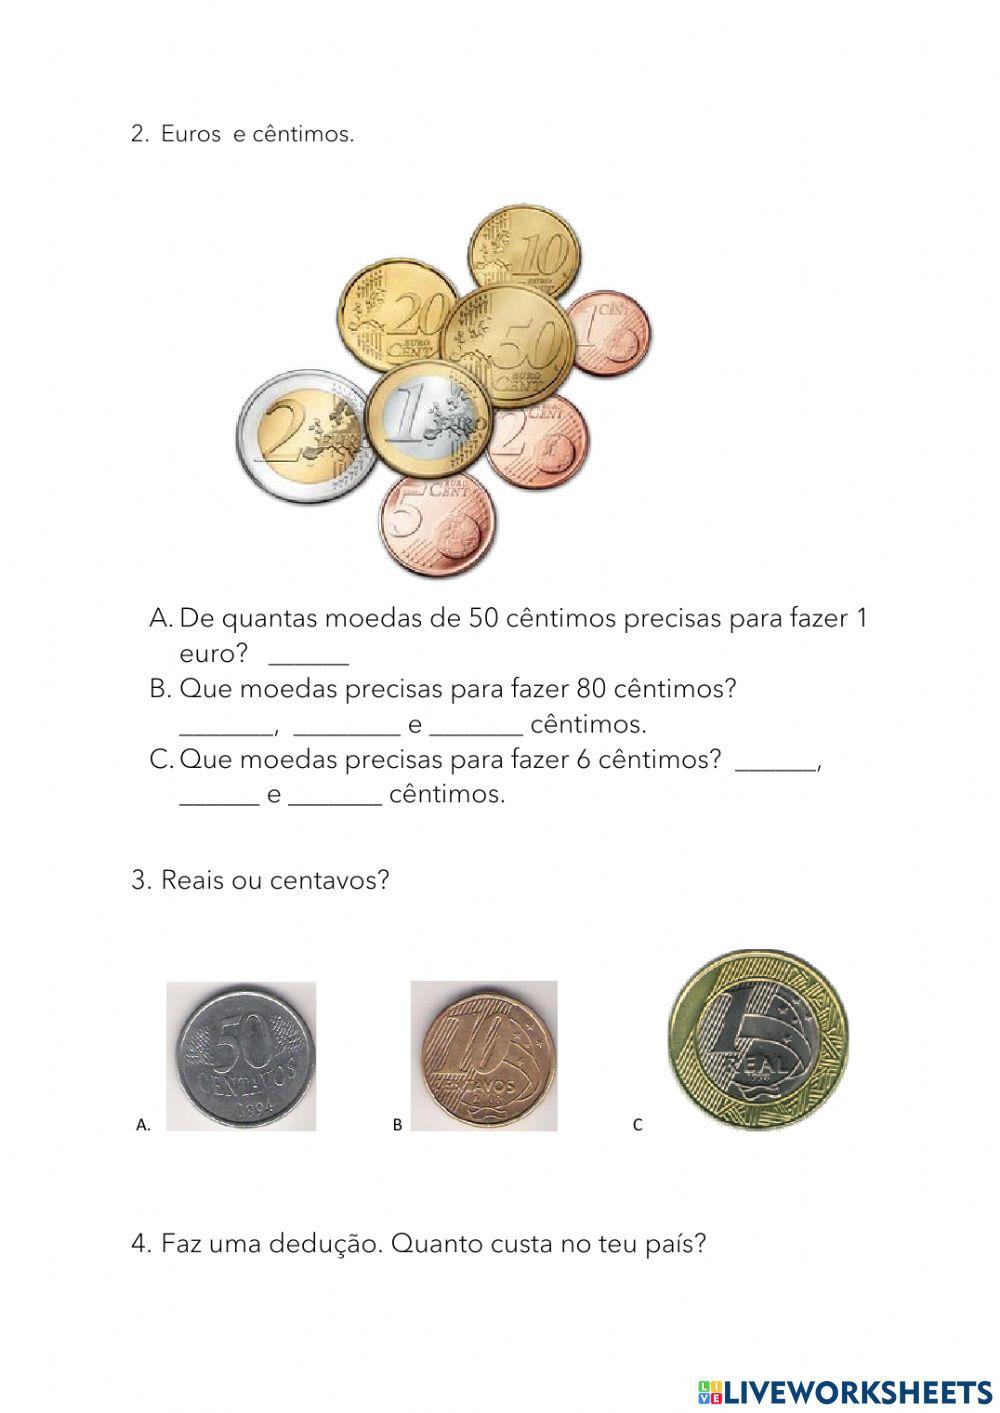 Euro e Real online exercise for | Live Worksheets